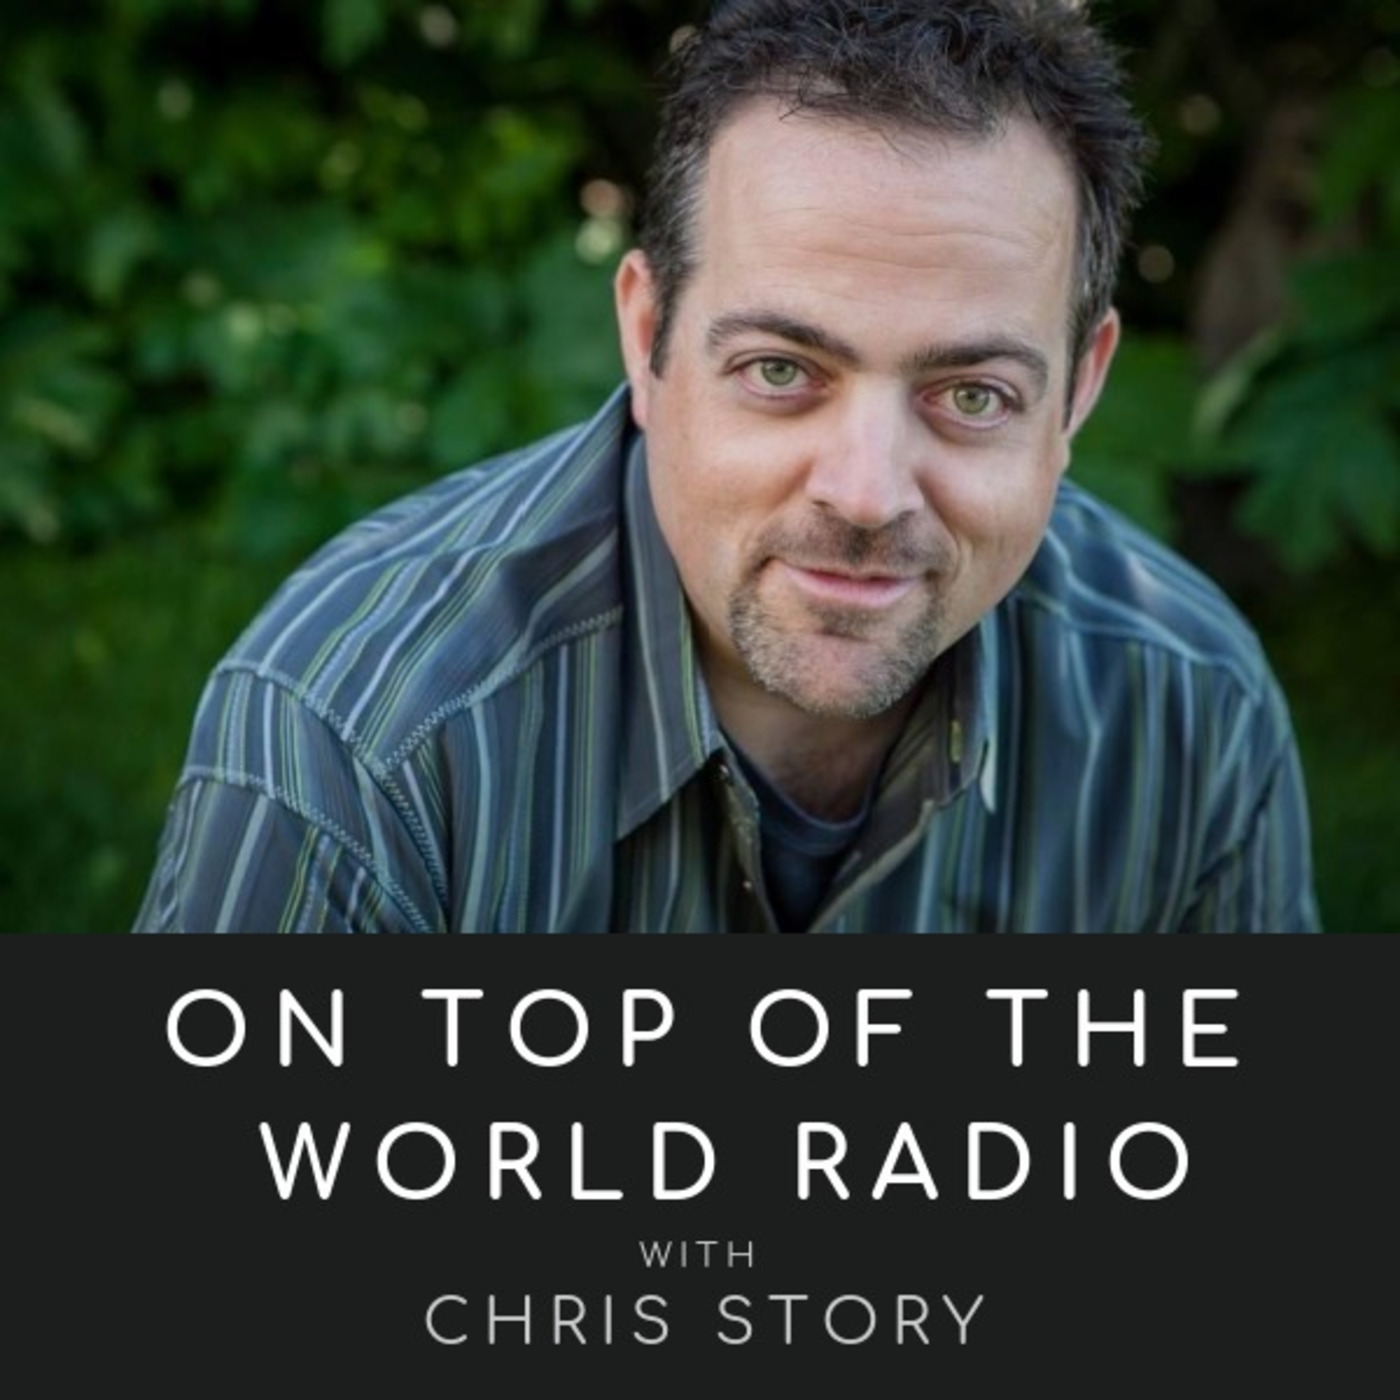 On Top of the World Radio with Chris Story